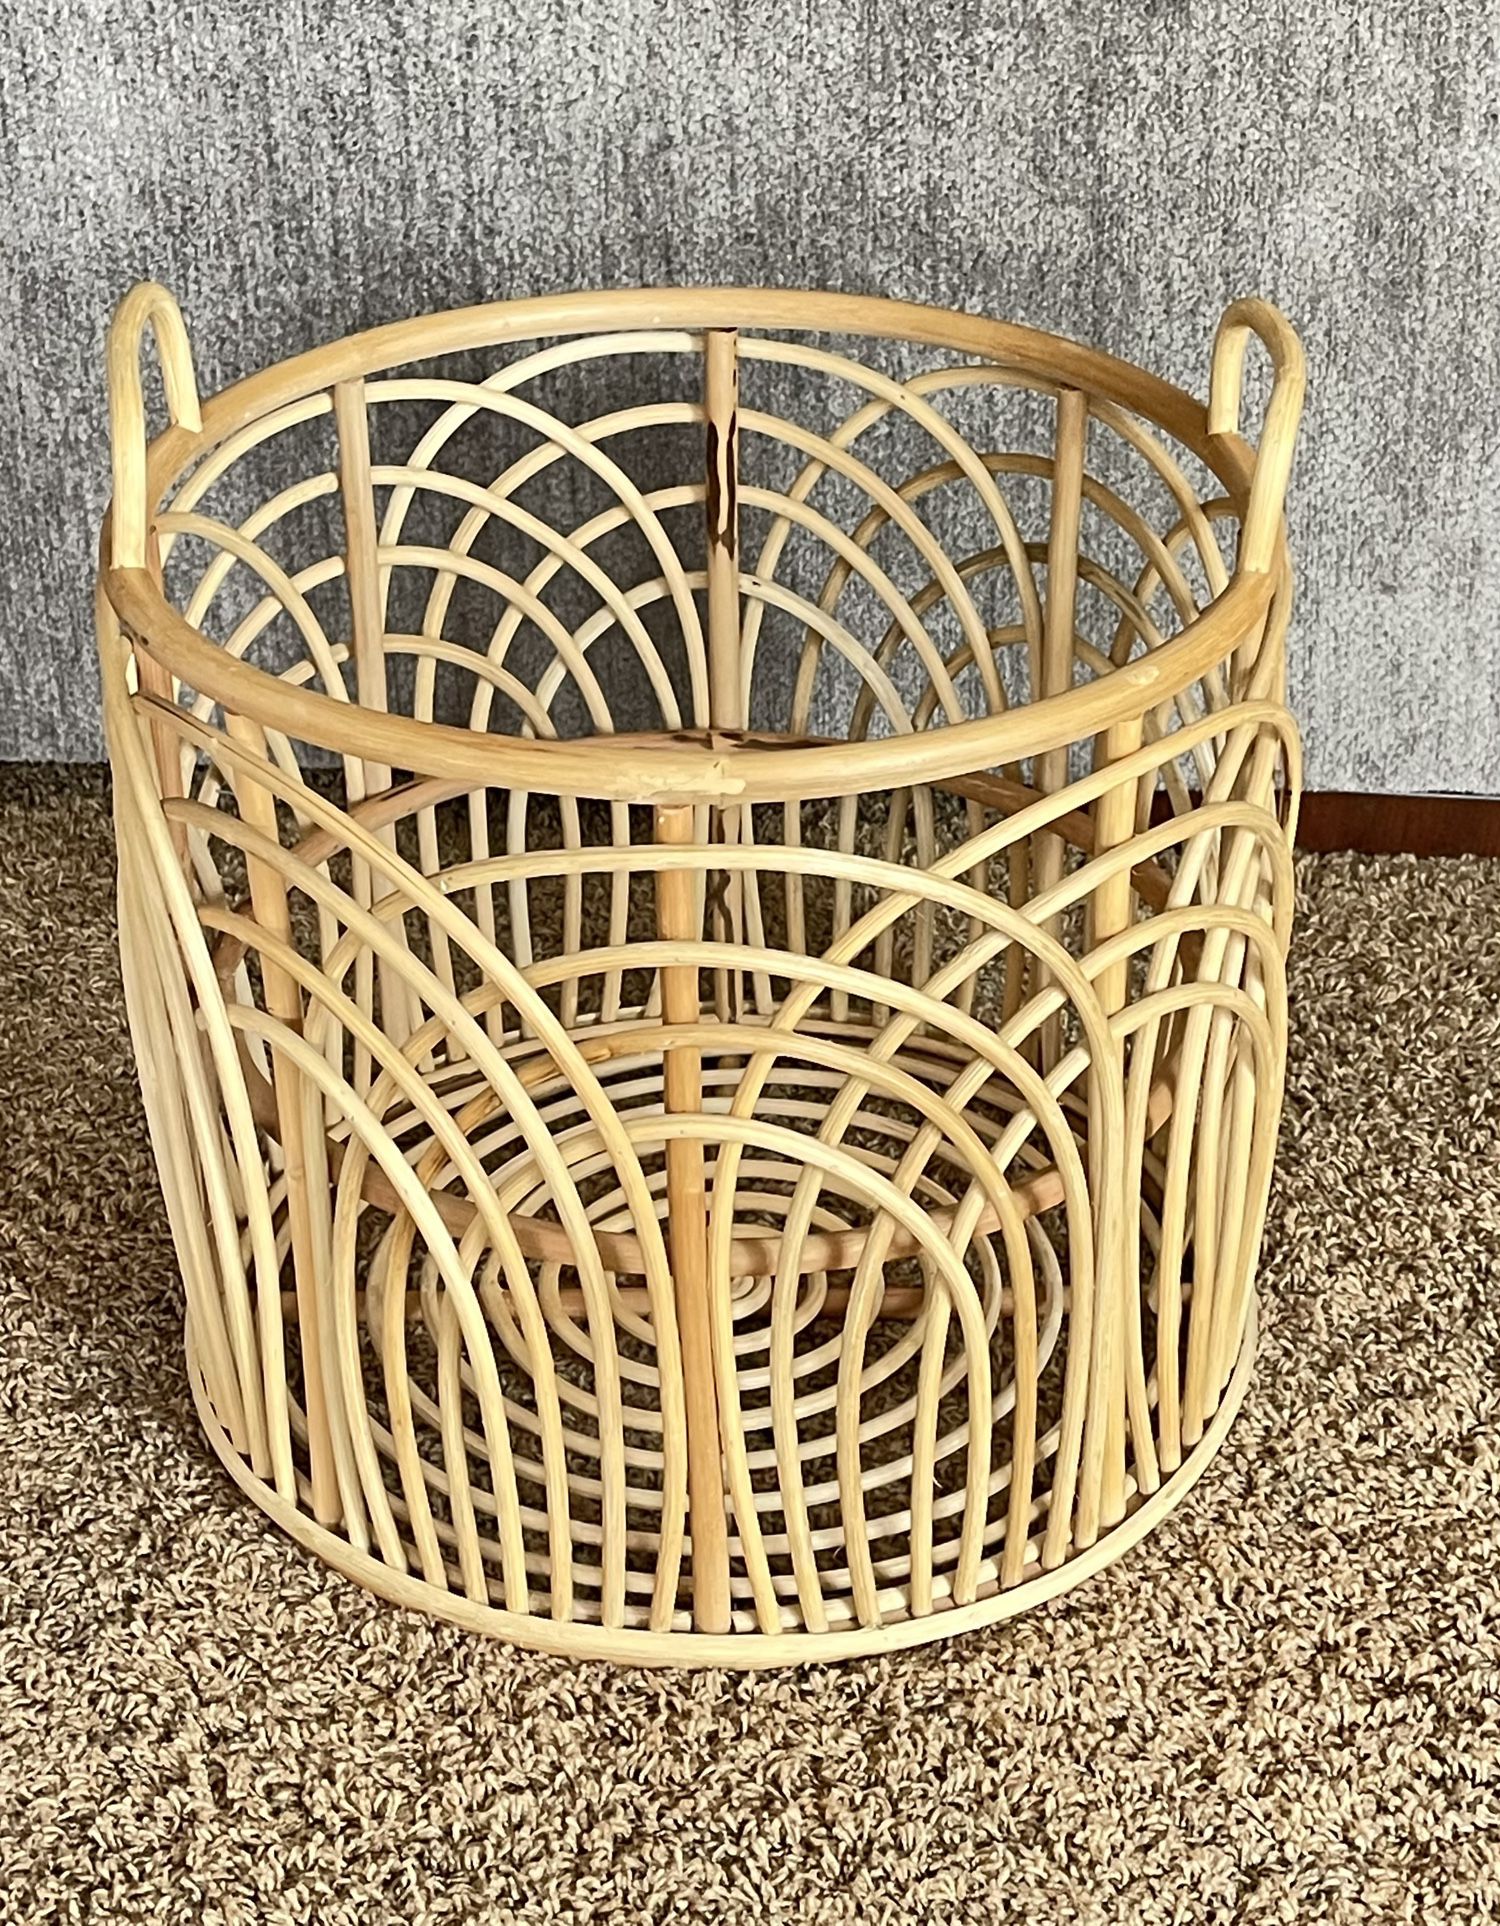 BEAUTIFUL ARCH BOHO LARGE RATTAN WICKER WOOD BASKET FOR LAUNDRY BLANKETS ETC 16” TALL 17” W 